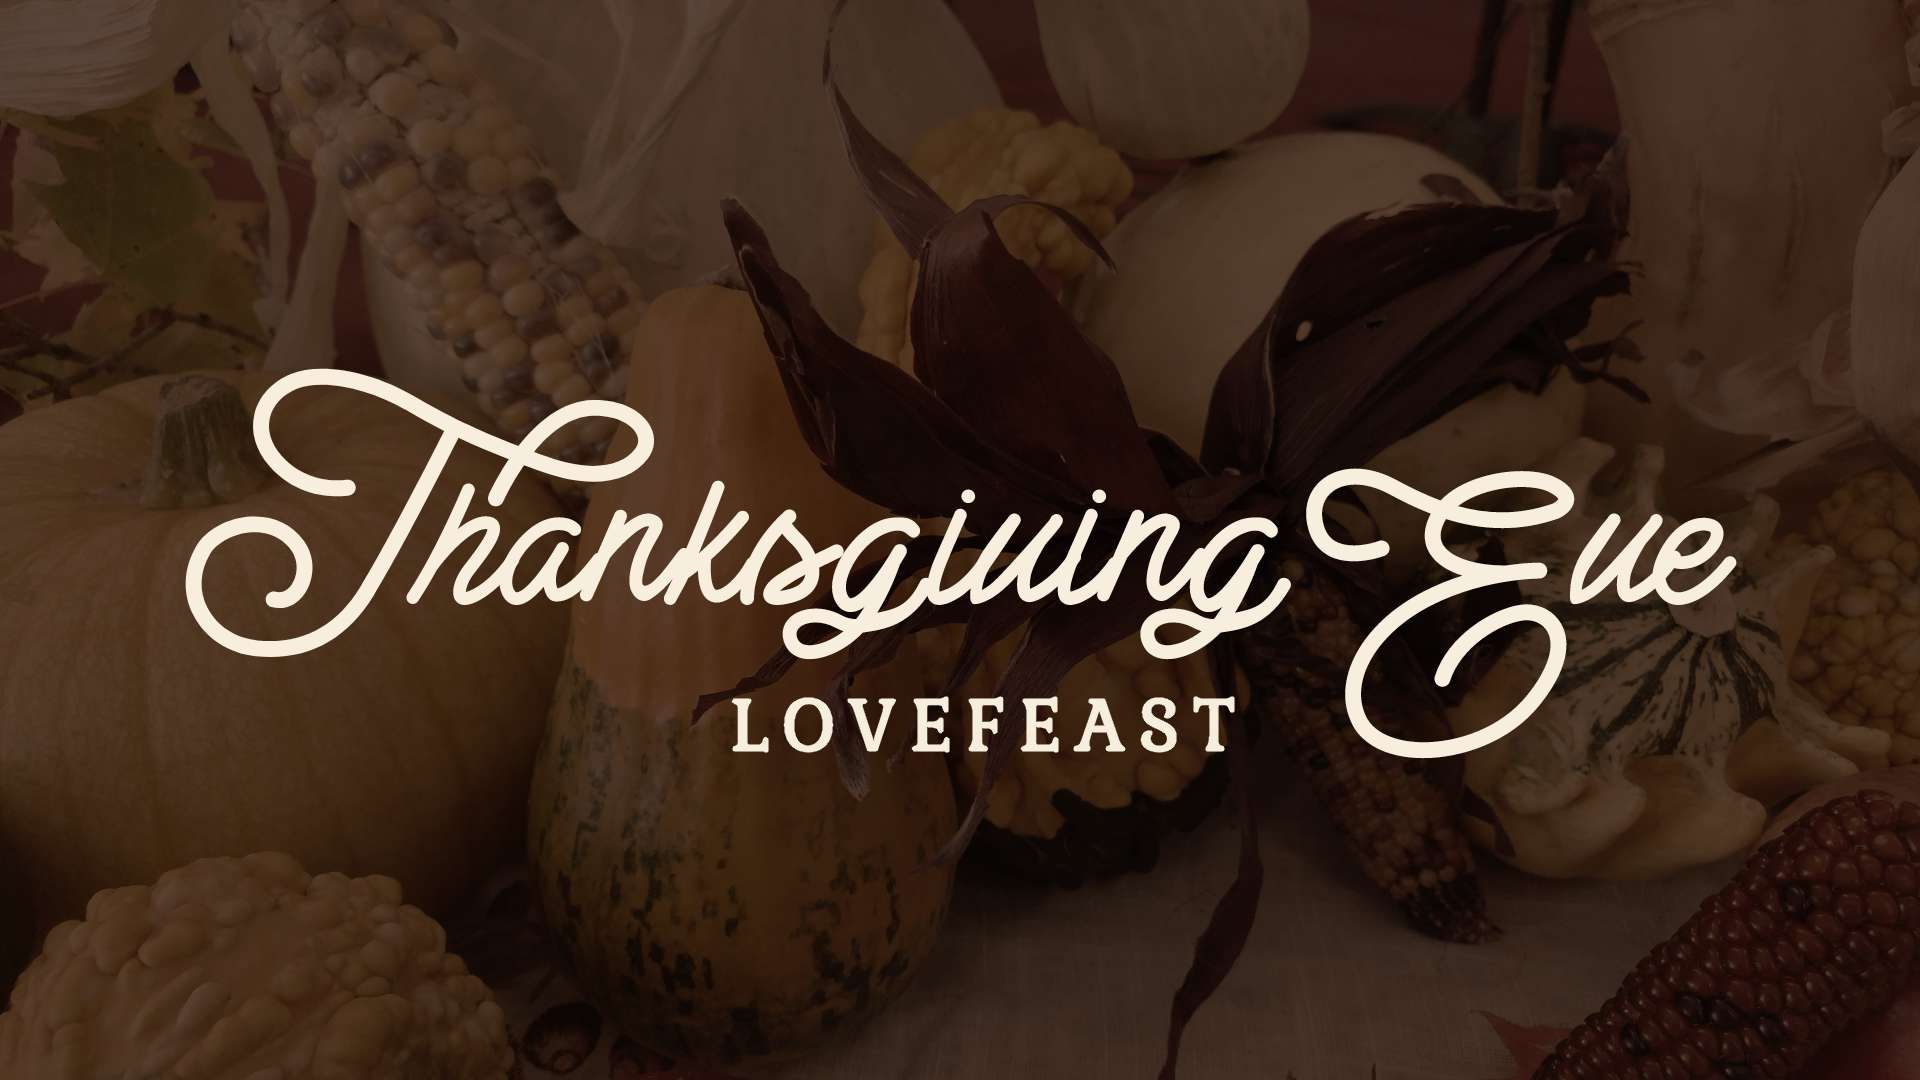 Title for Thanksgiving Eve Lovefeast Service